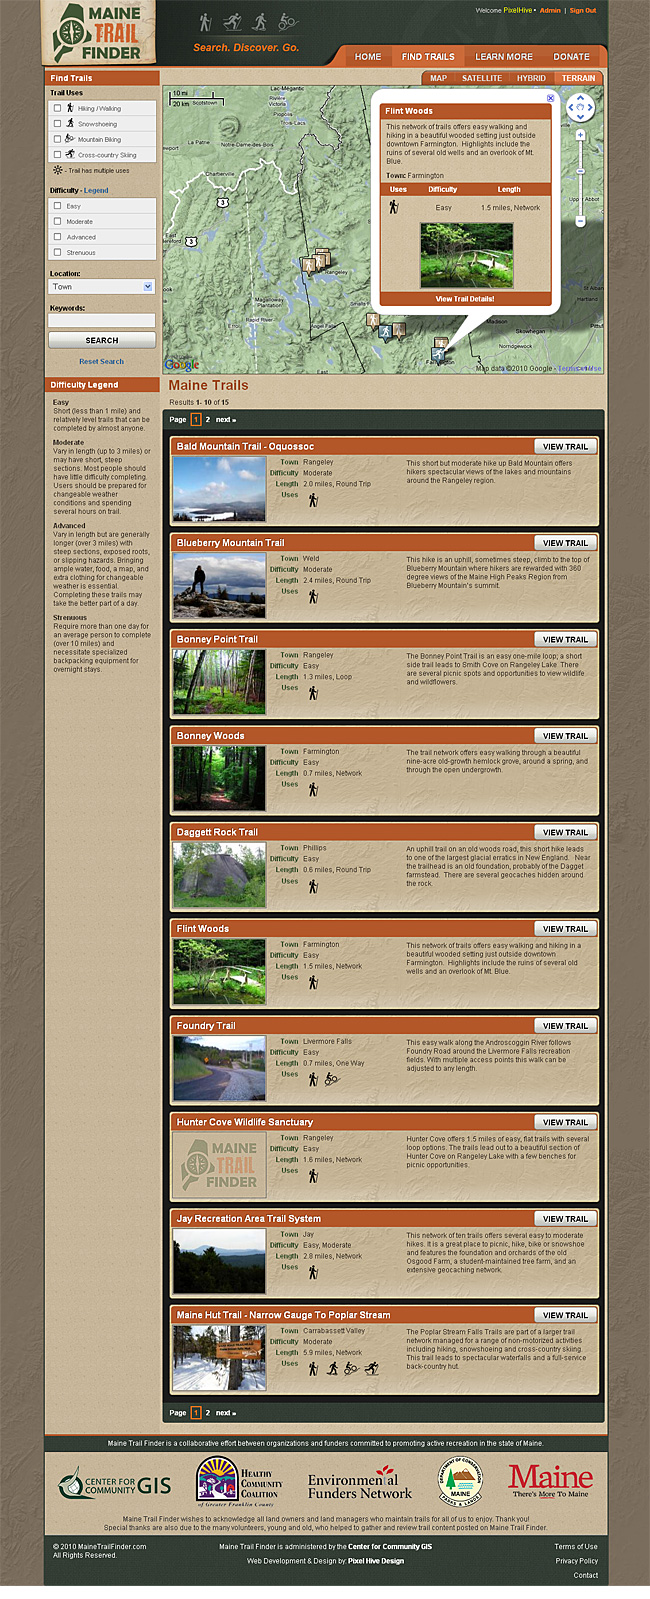 Maine Trail Finder Trail Listing Page